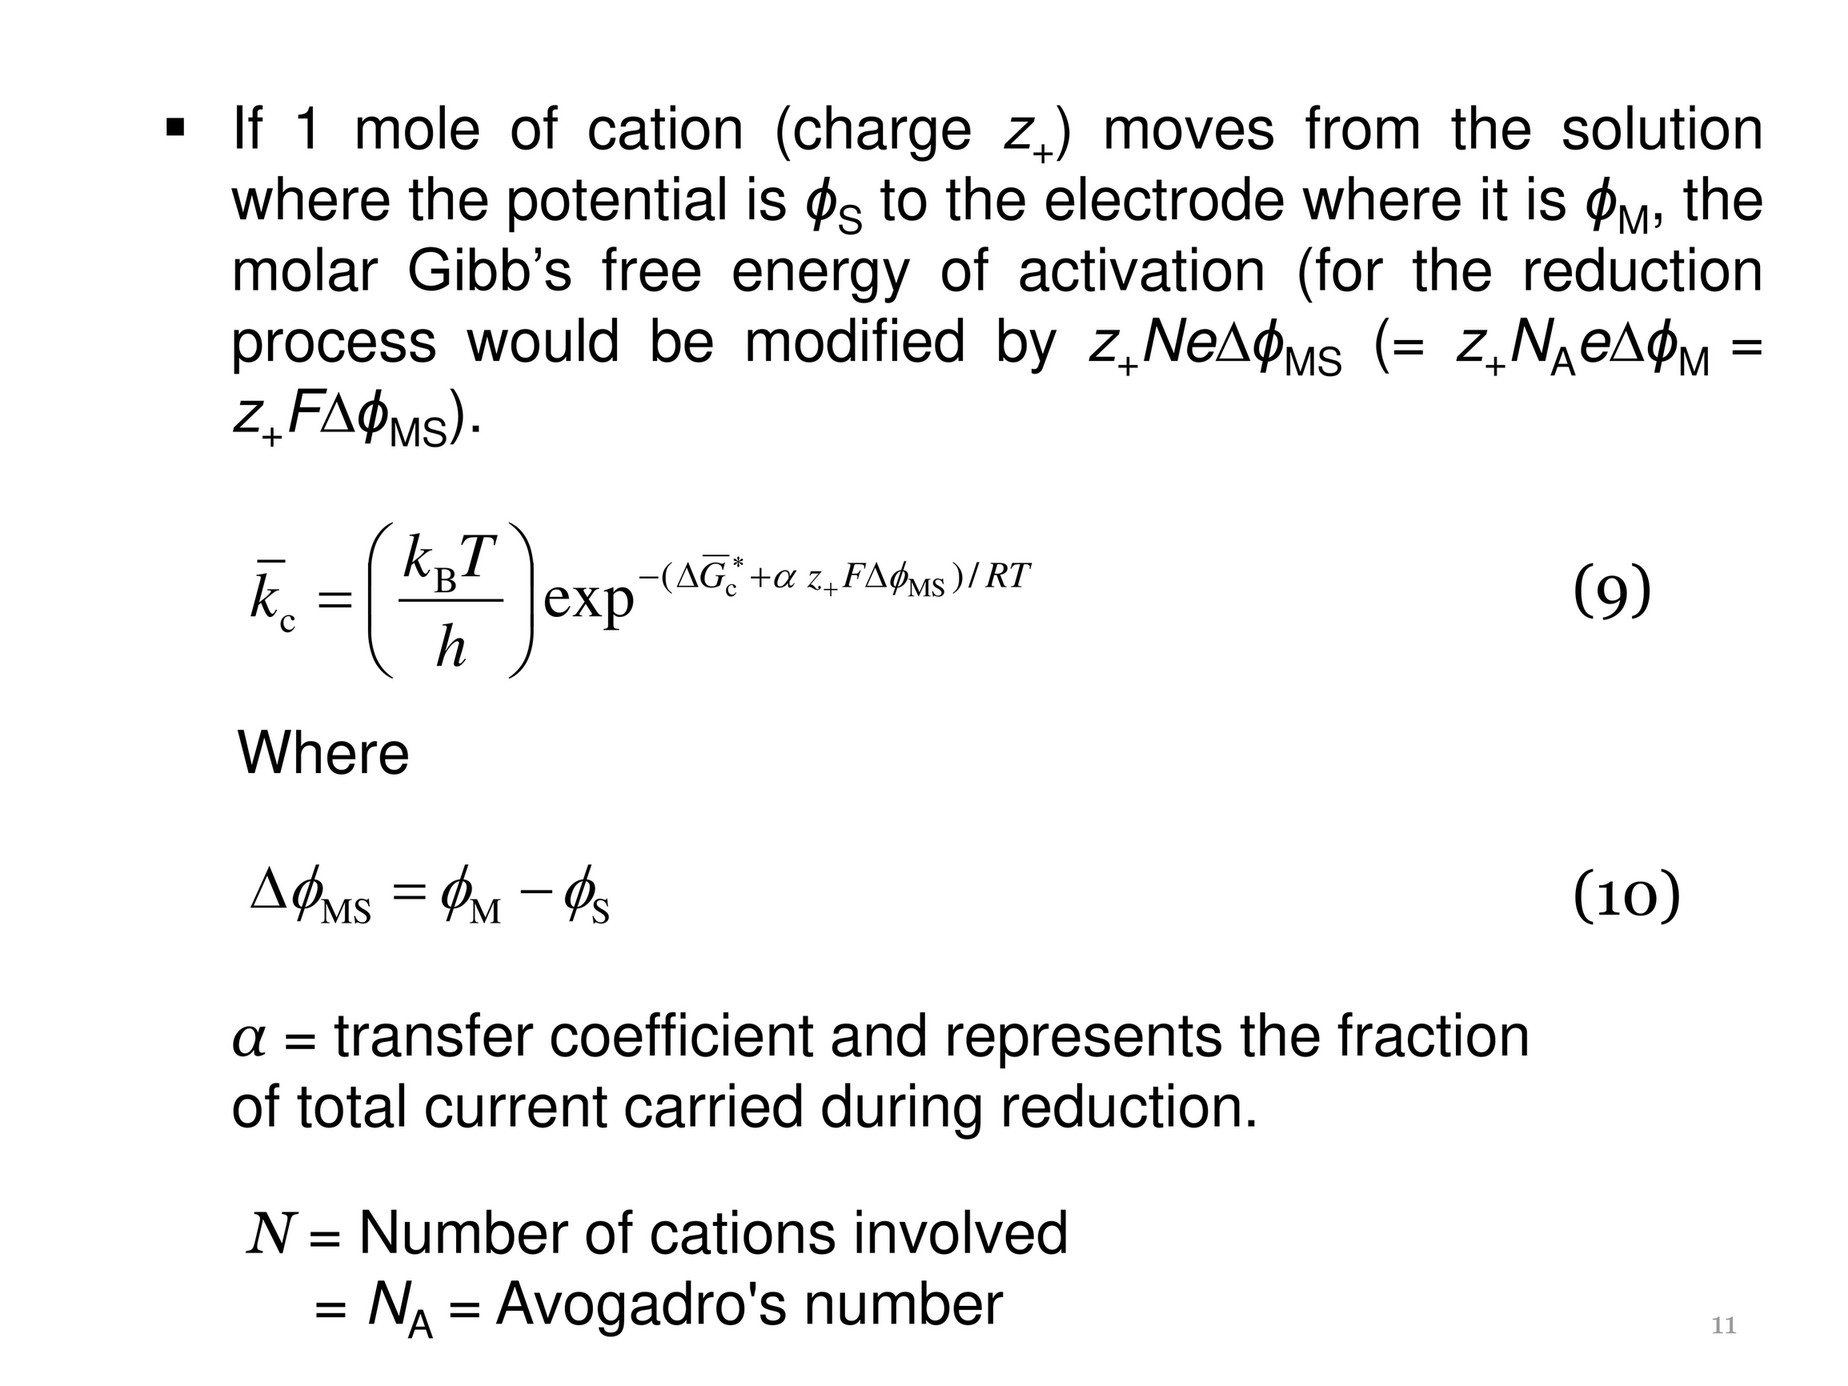 My publications - CHM 304-ELECTROCHEMISTRY-LECTURE II - Page 21